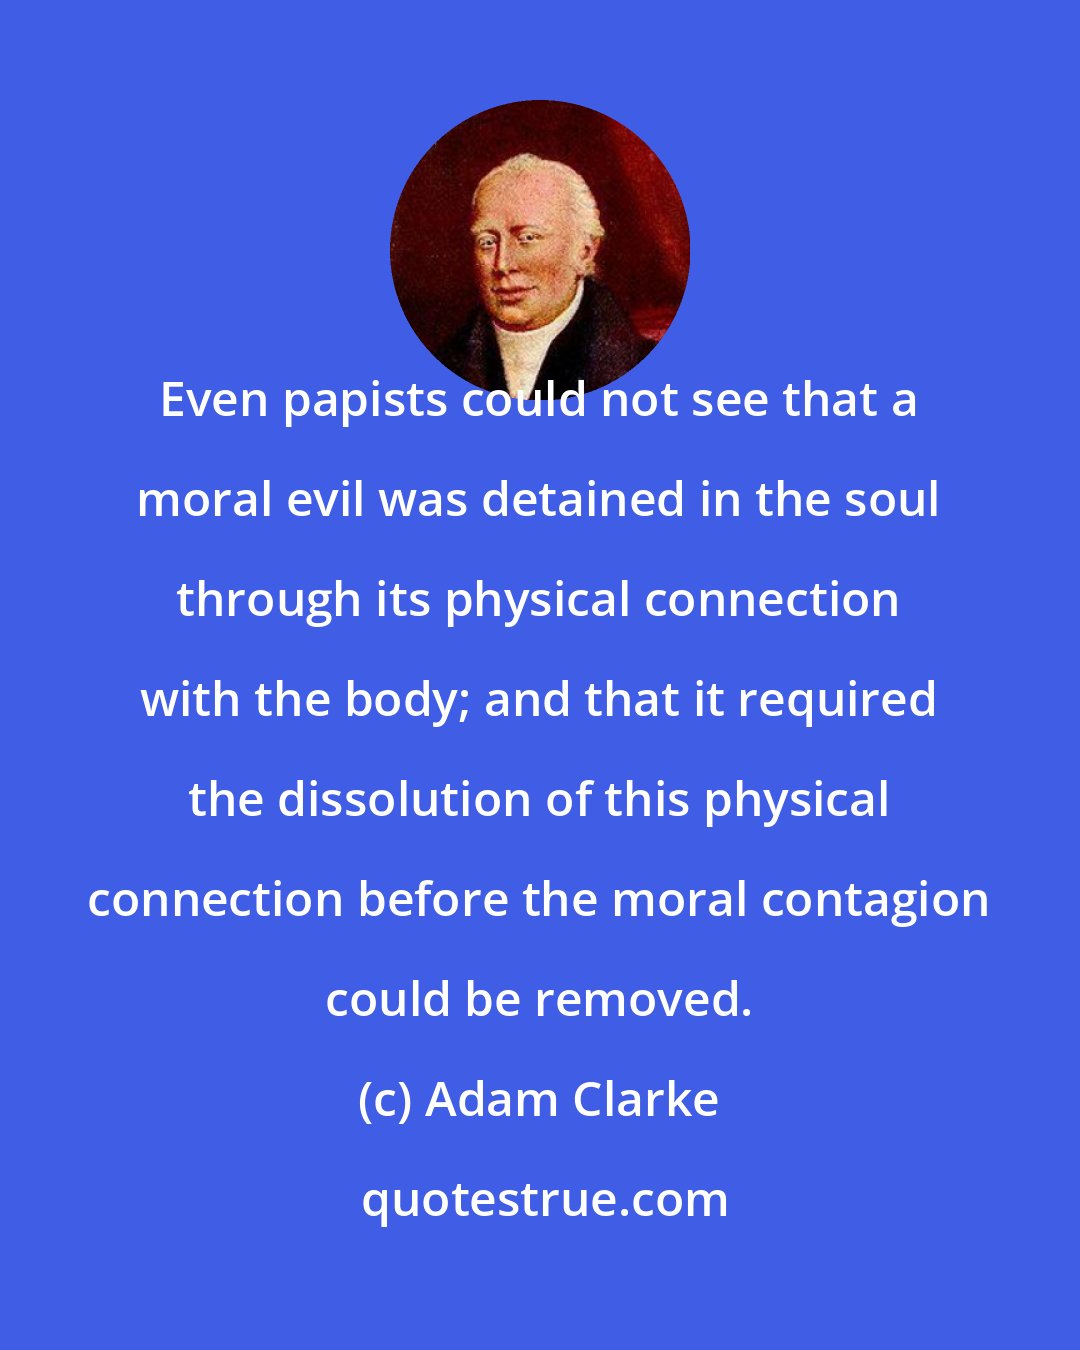 Adam Clarke: Even papists could not see that a moral evil was detained in the soul through its physical connection with the body; and that it required the dissolution of this physical connection before the moral contagion could be removed.